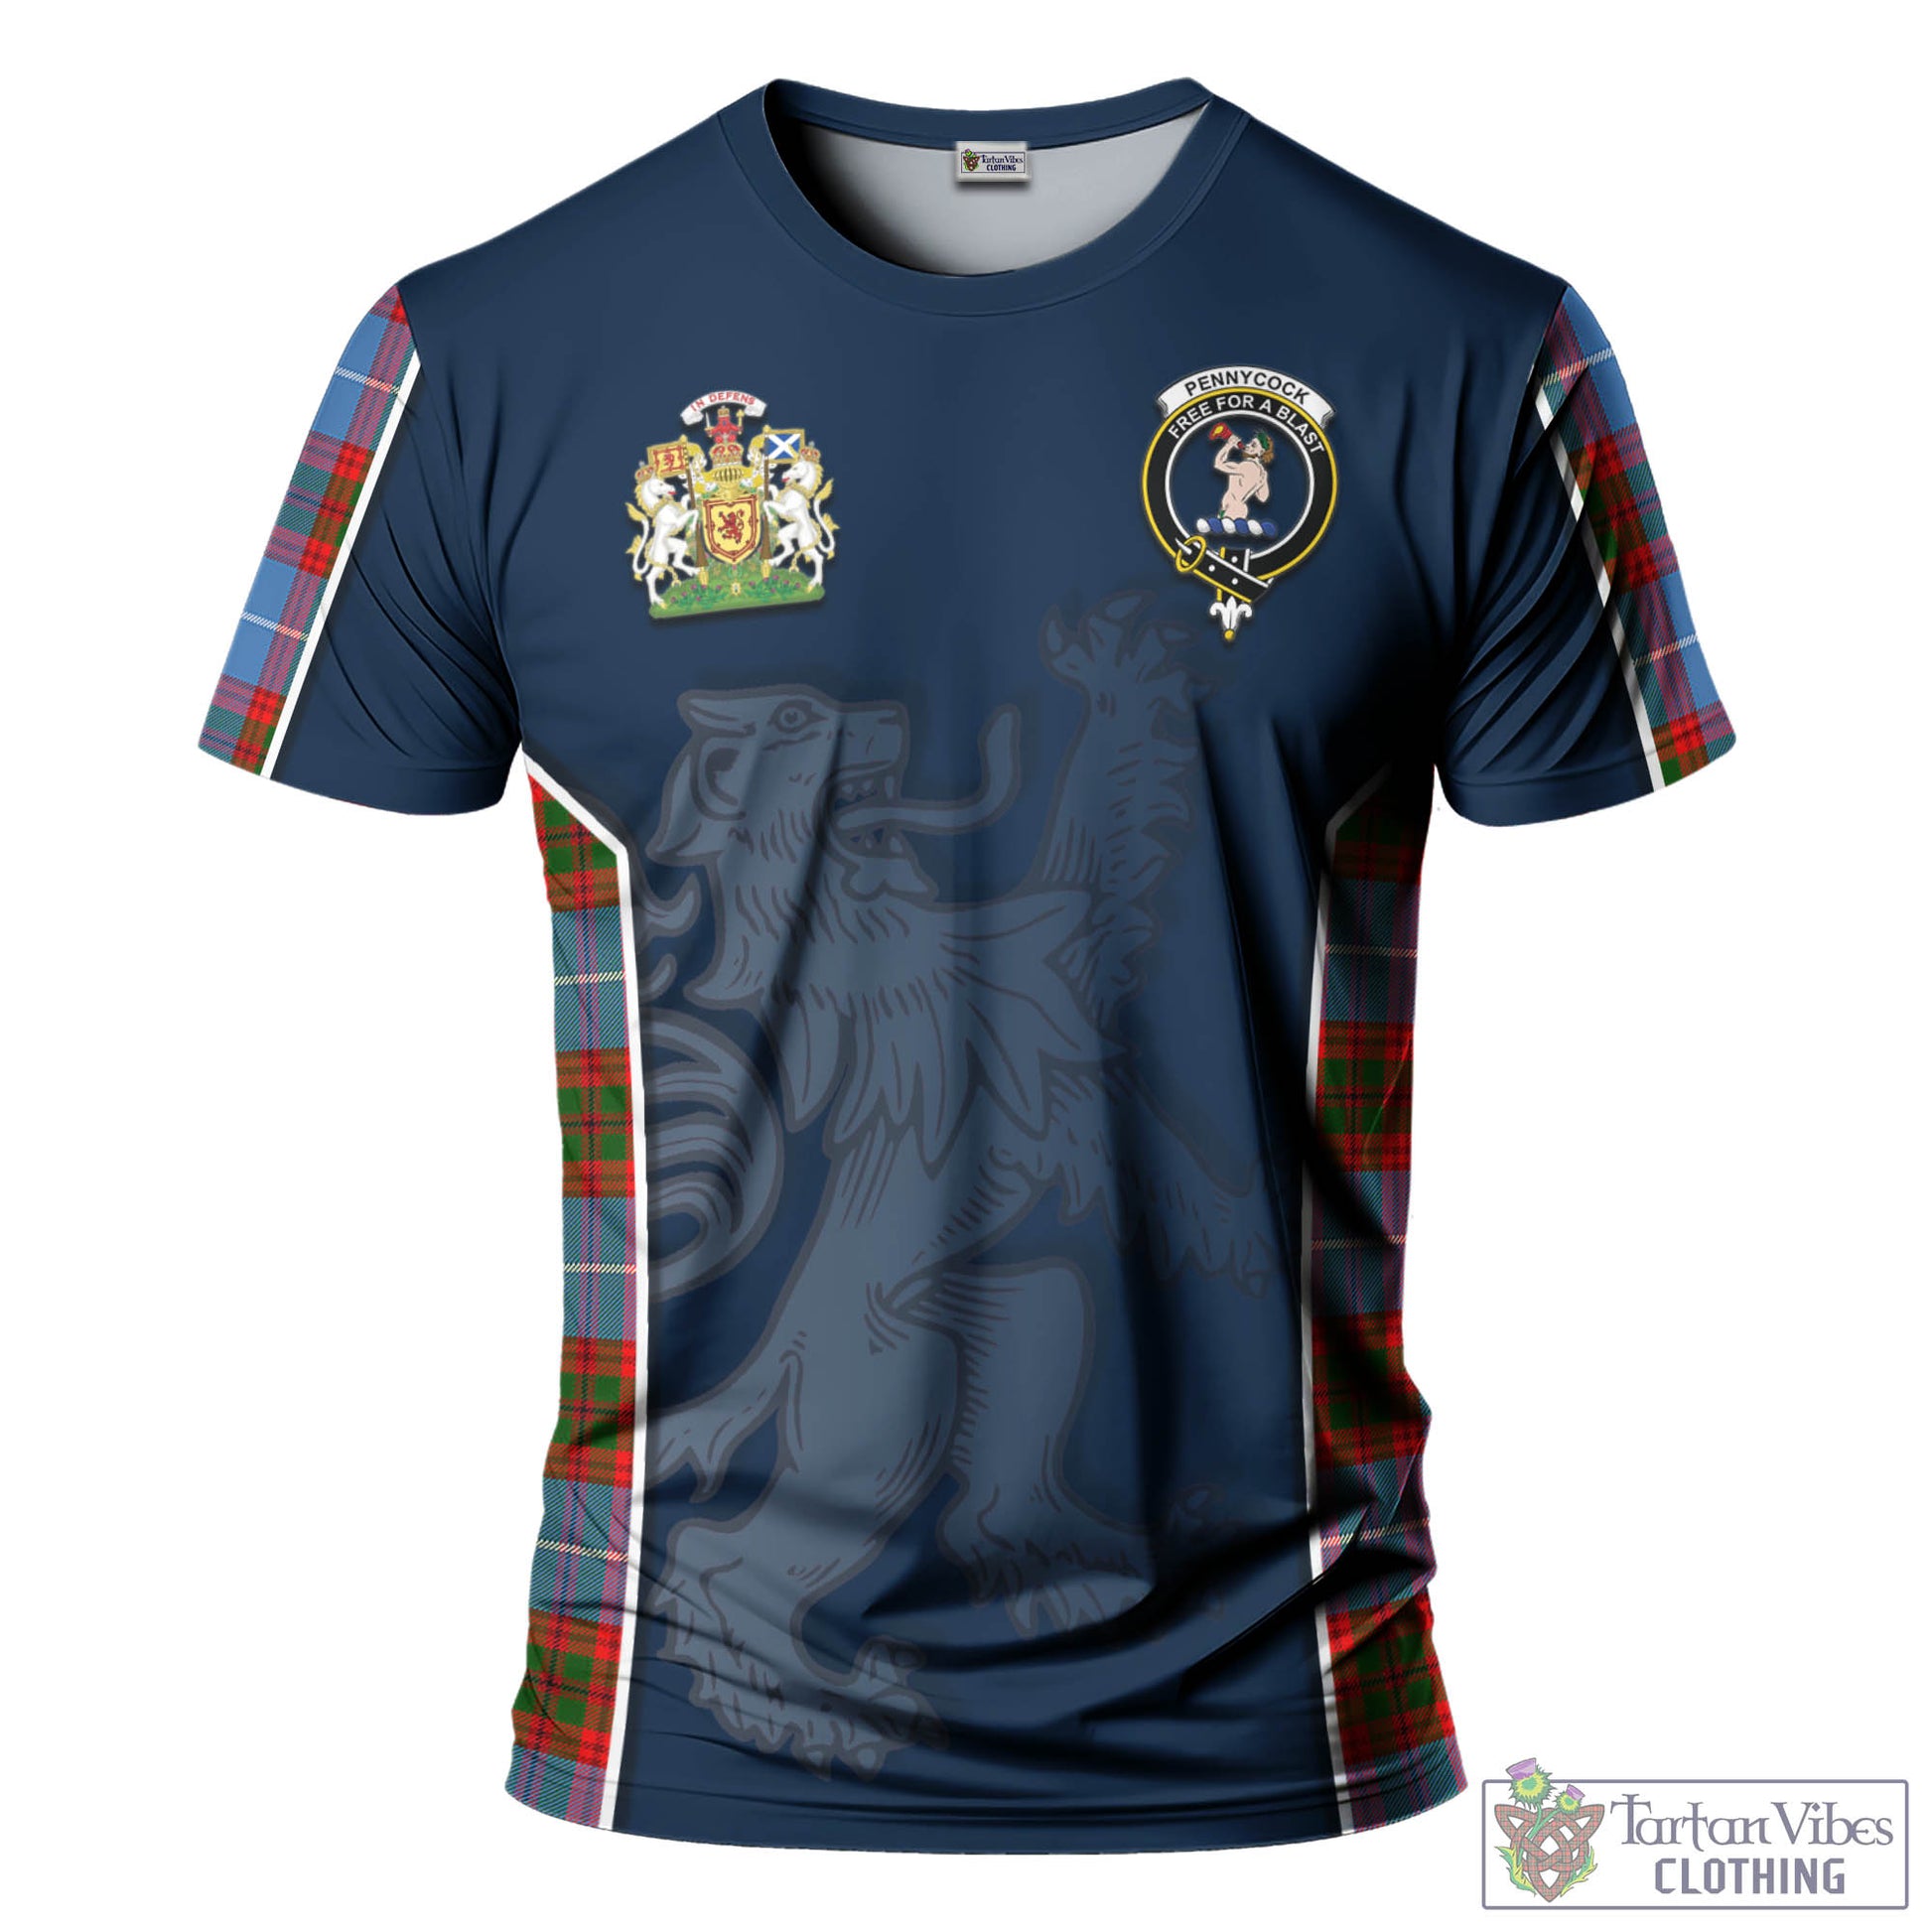 Tartan Vibes Clothing Pennycook Tartan T-Shirt with Family Crest and Lion Rampant Vibes Sport Style